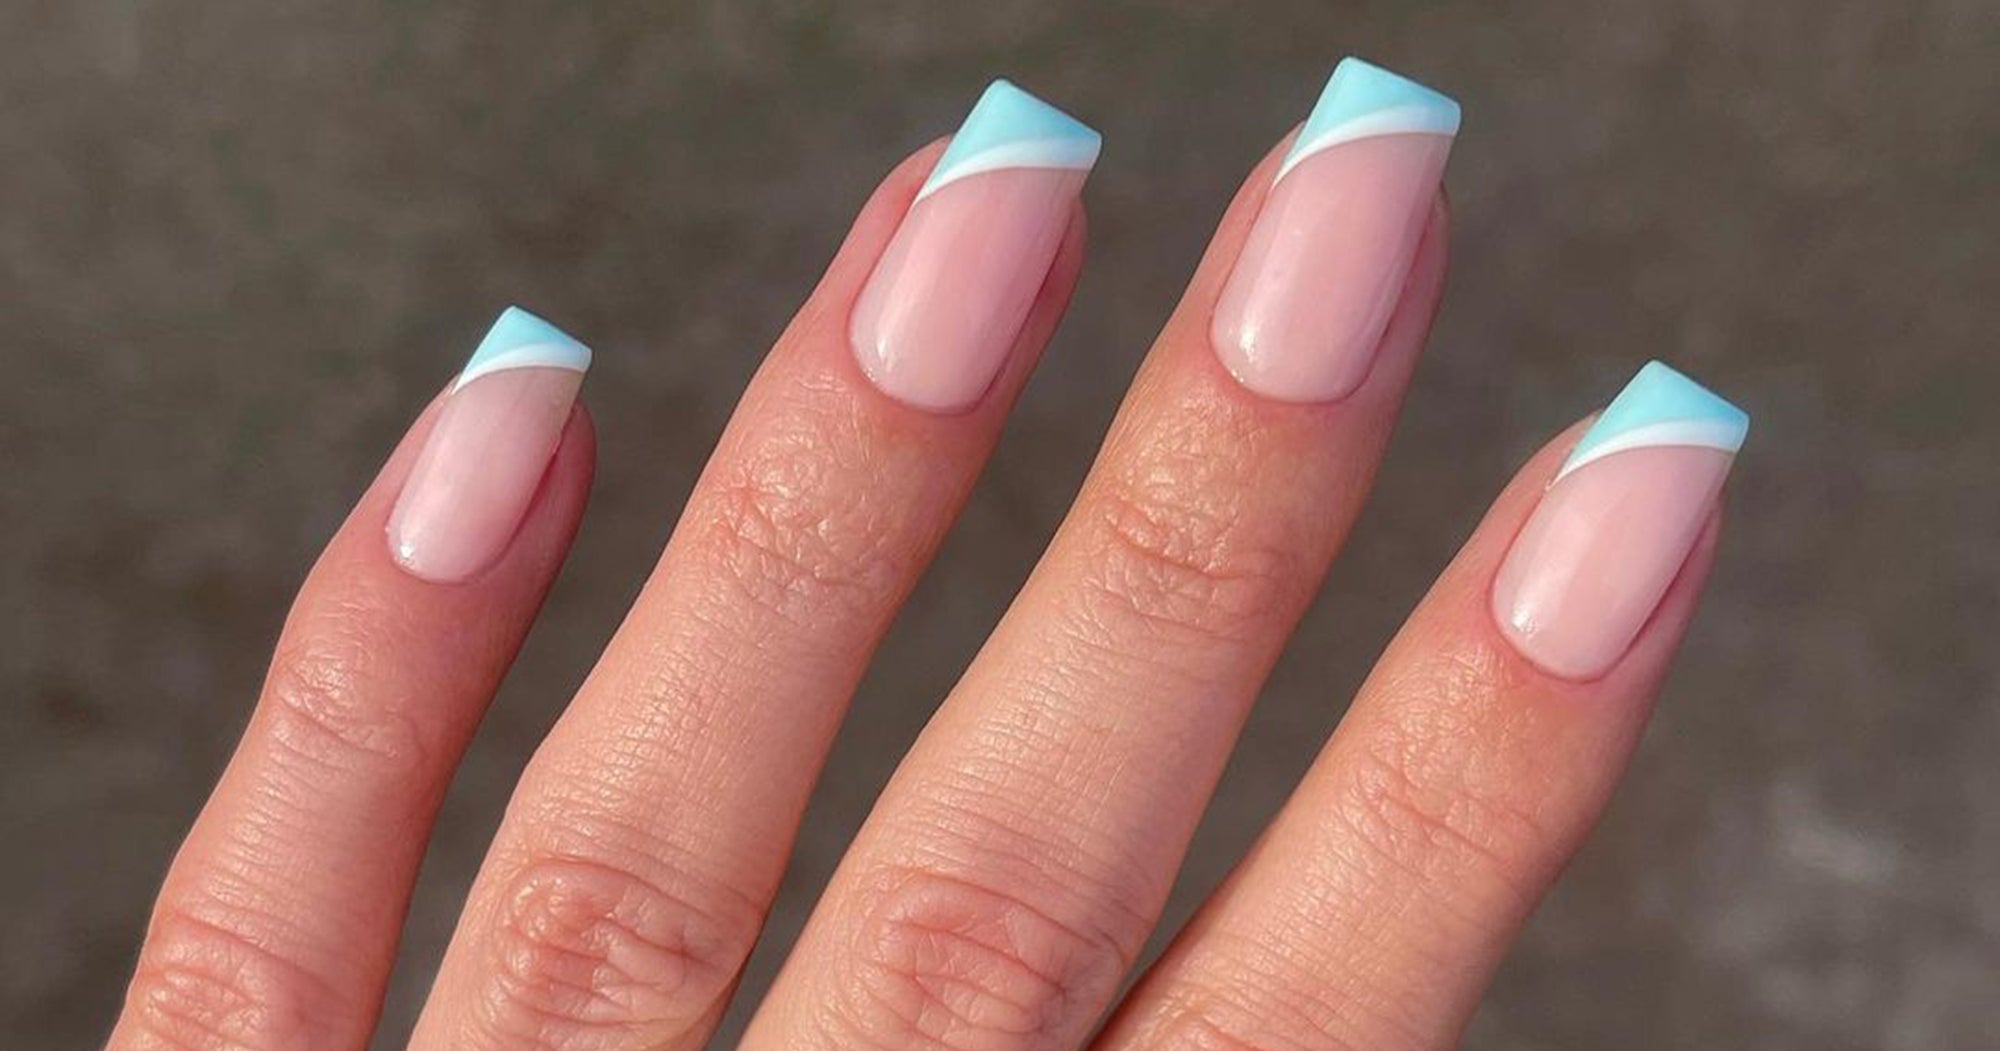 11 Double French Manicure Ideas That Are Cooler Than The Classic